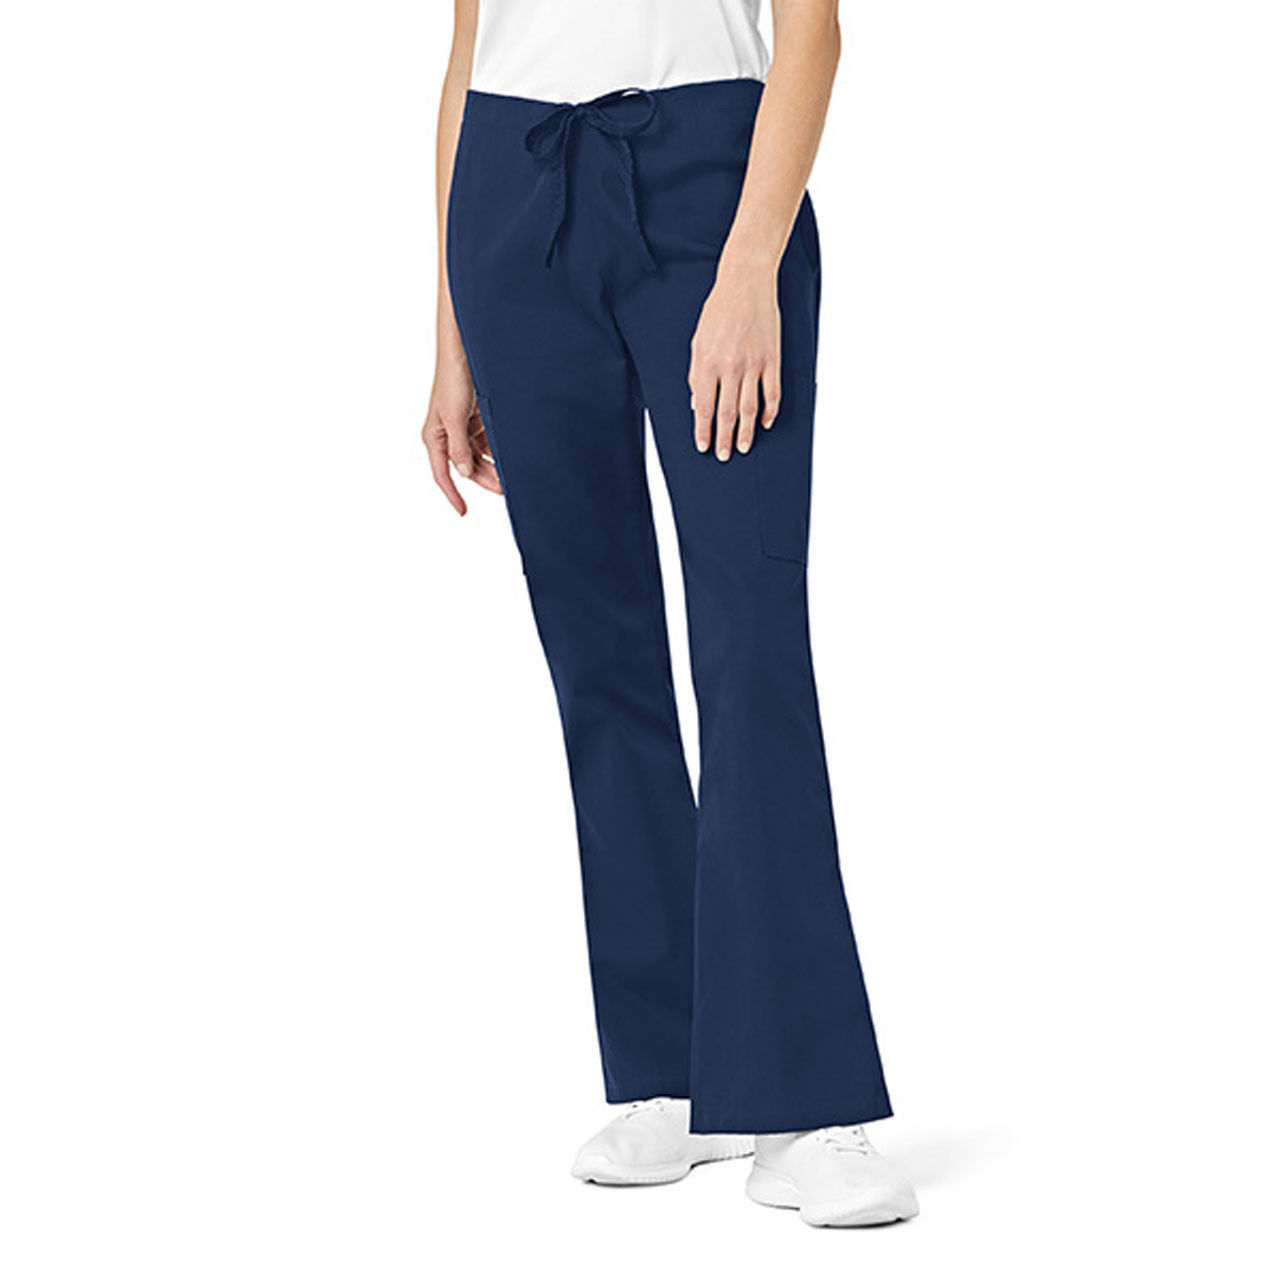 What material are the Women's Flare Cargo Pants made of?